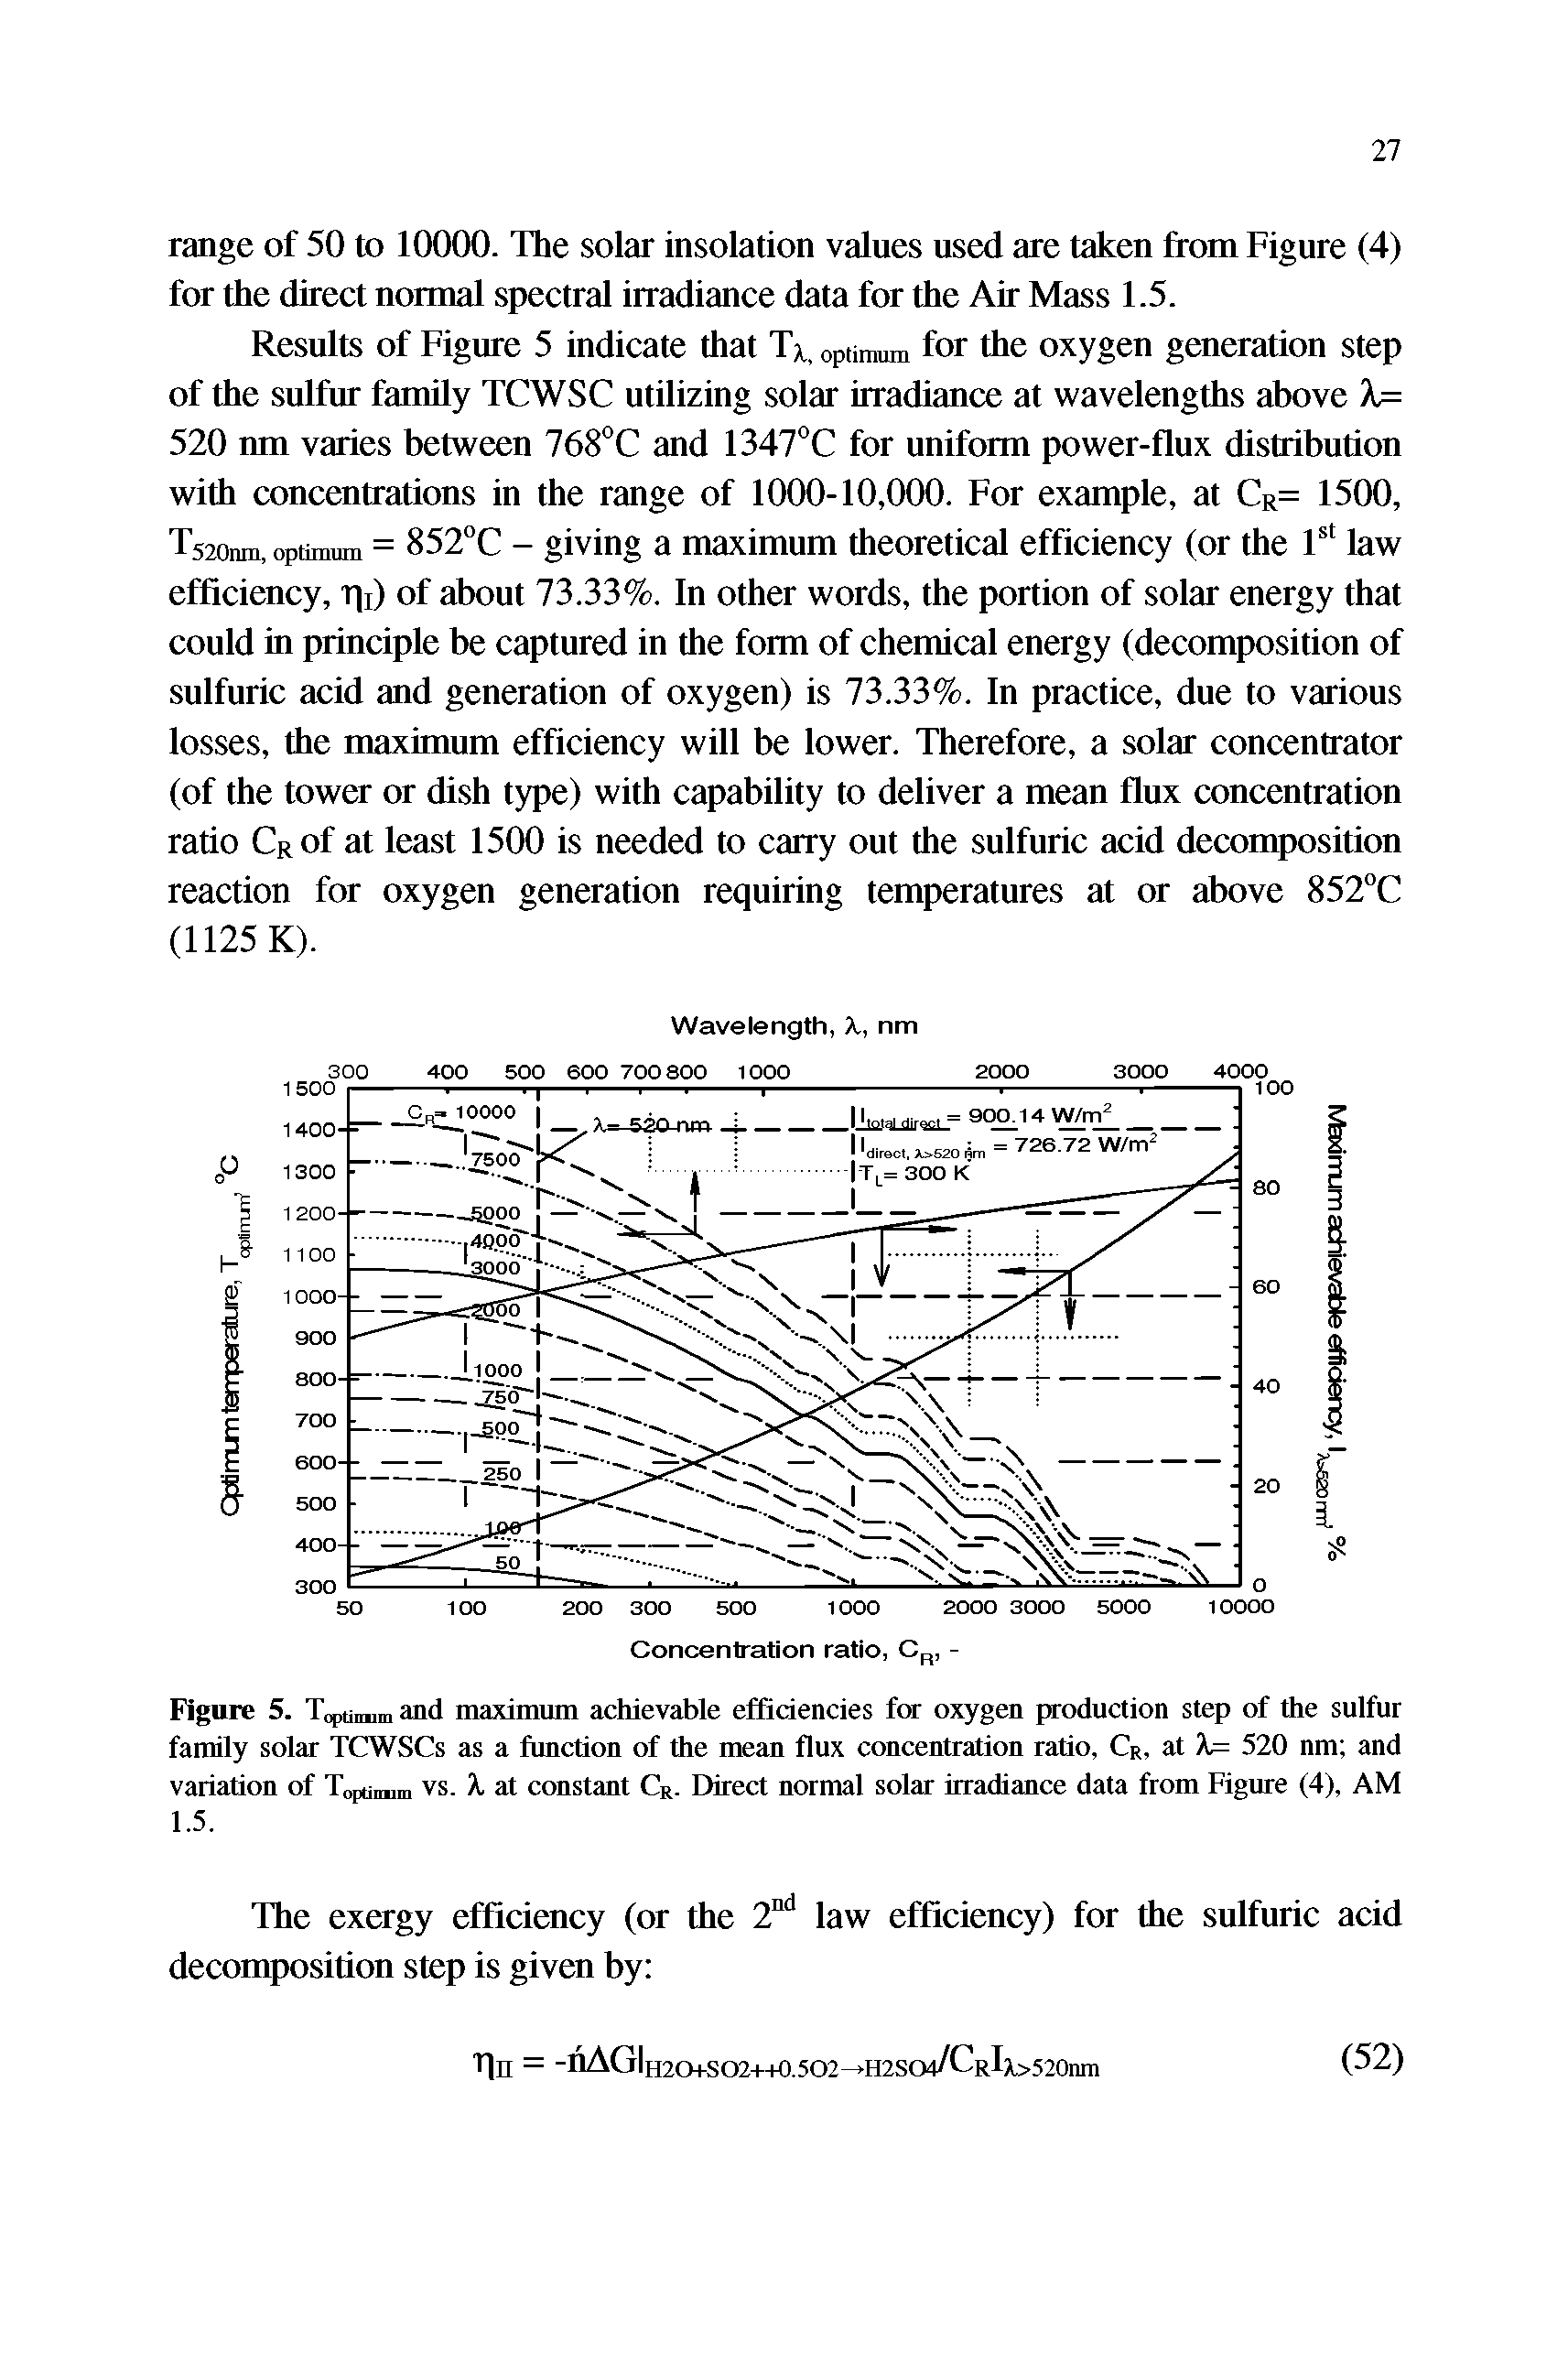 Figure 5. Topumm and maximum achievable efficiencies for oxygen production step of the sulfur family solar TCWSCs as a function of the mean flux concentration ratio, Cr, at X= 520 nm and variation of Toptimm vs. X at constant Cr. Direct normal solar irradiance data from Figure (4), AM 1.5.